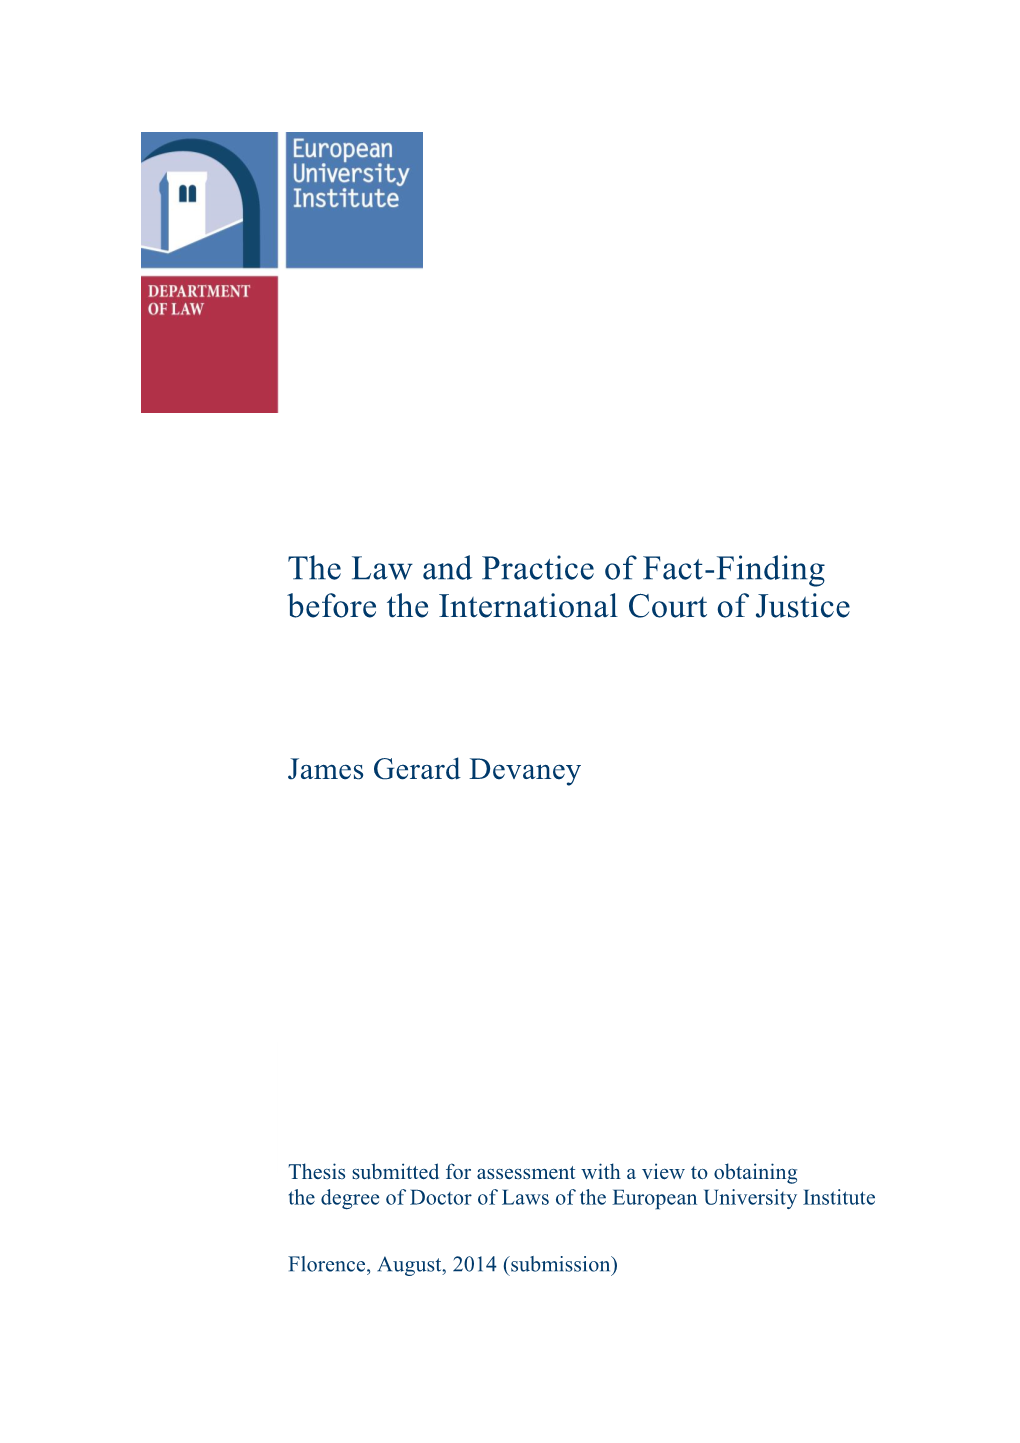 The Law and Practice of Fact-Finding Before the International Court of Justice